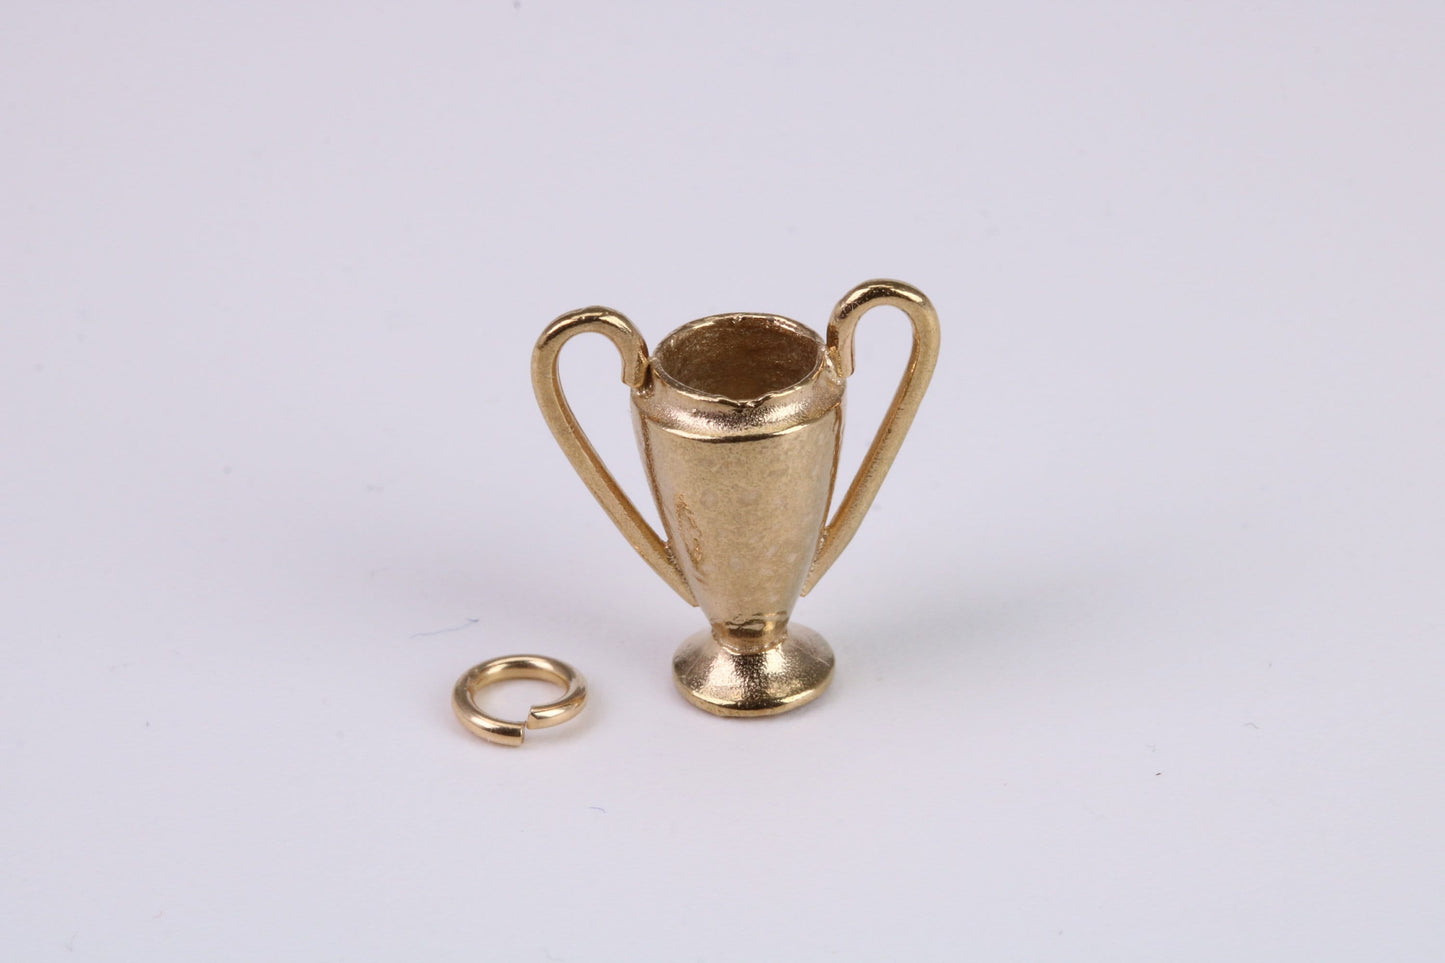 Sports Trophy Charm, Traditional Charm, Made From Solid Yellow Gold with British Hallmark, Complete with Attachment Link